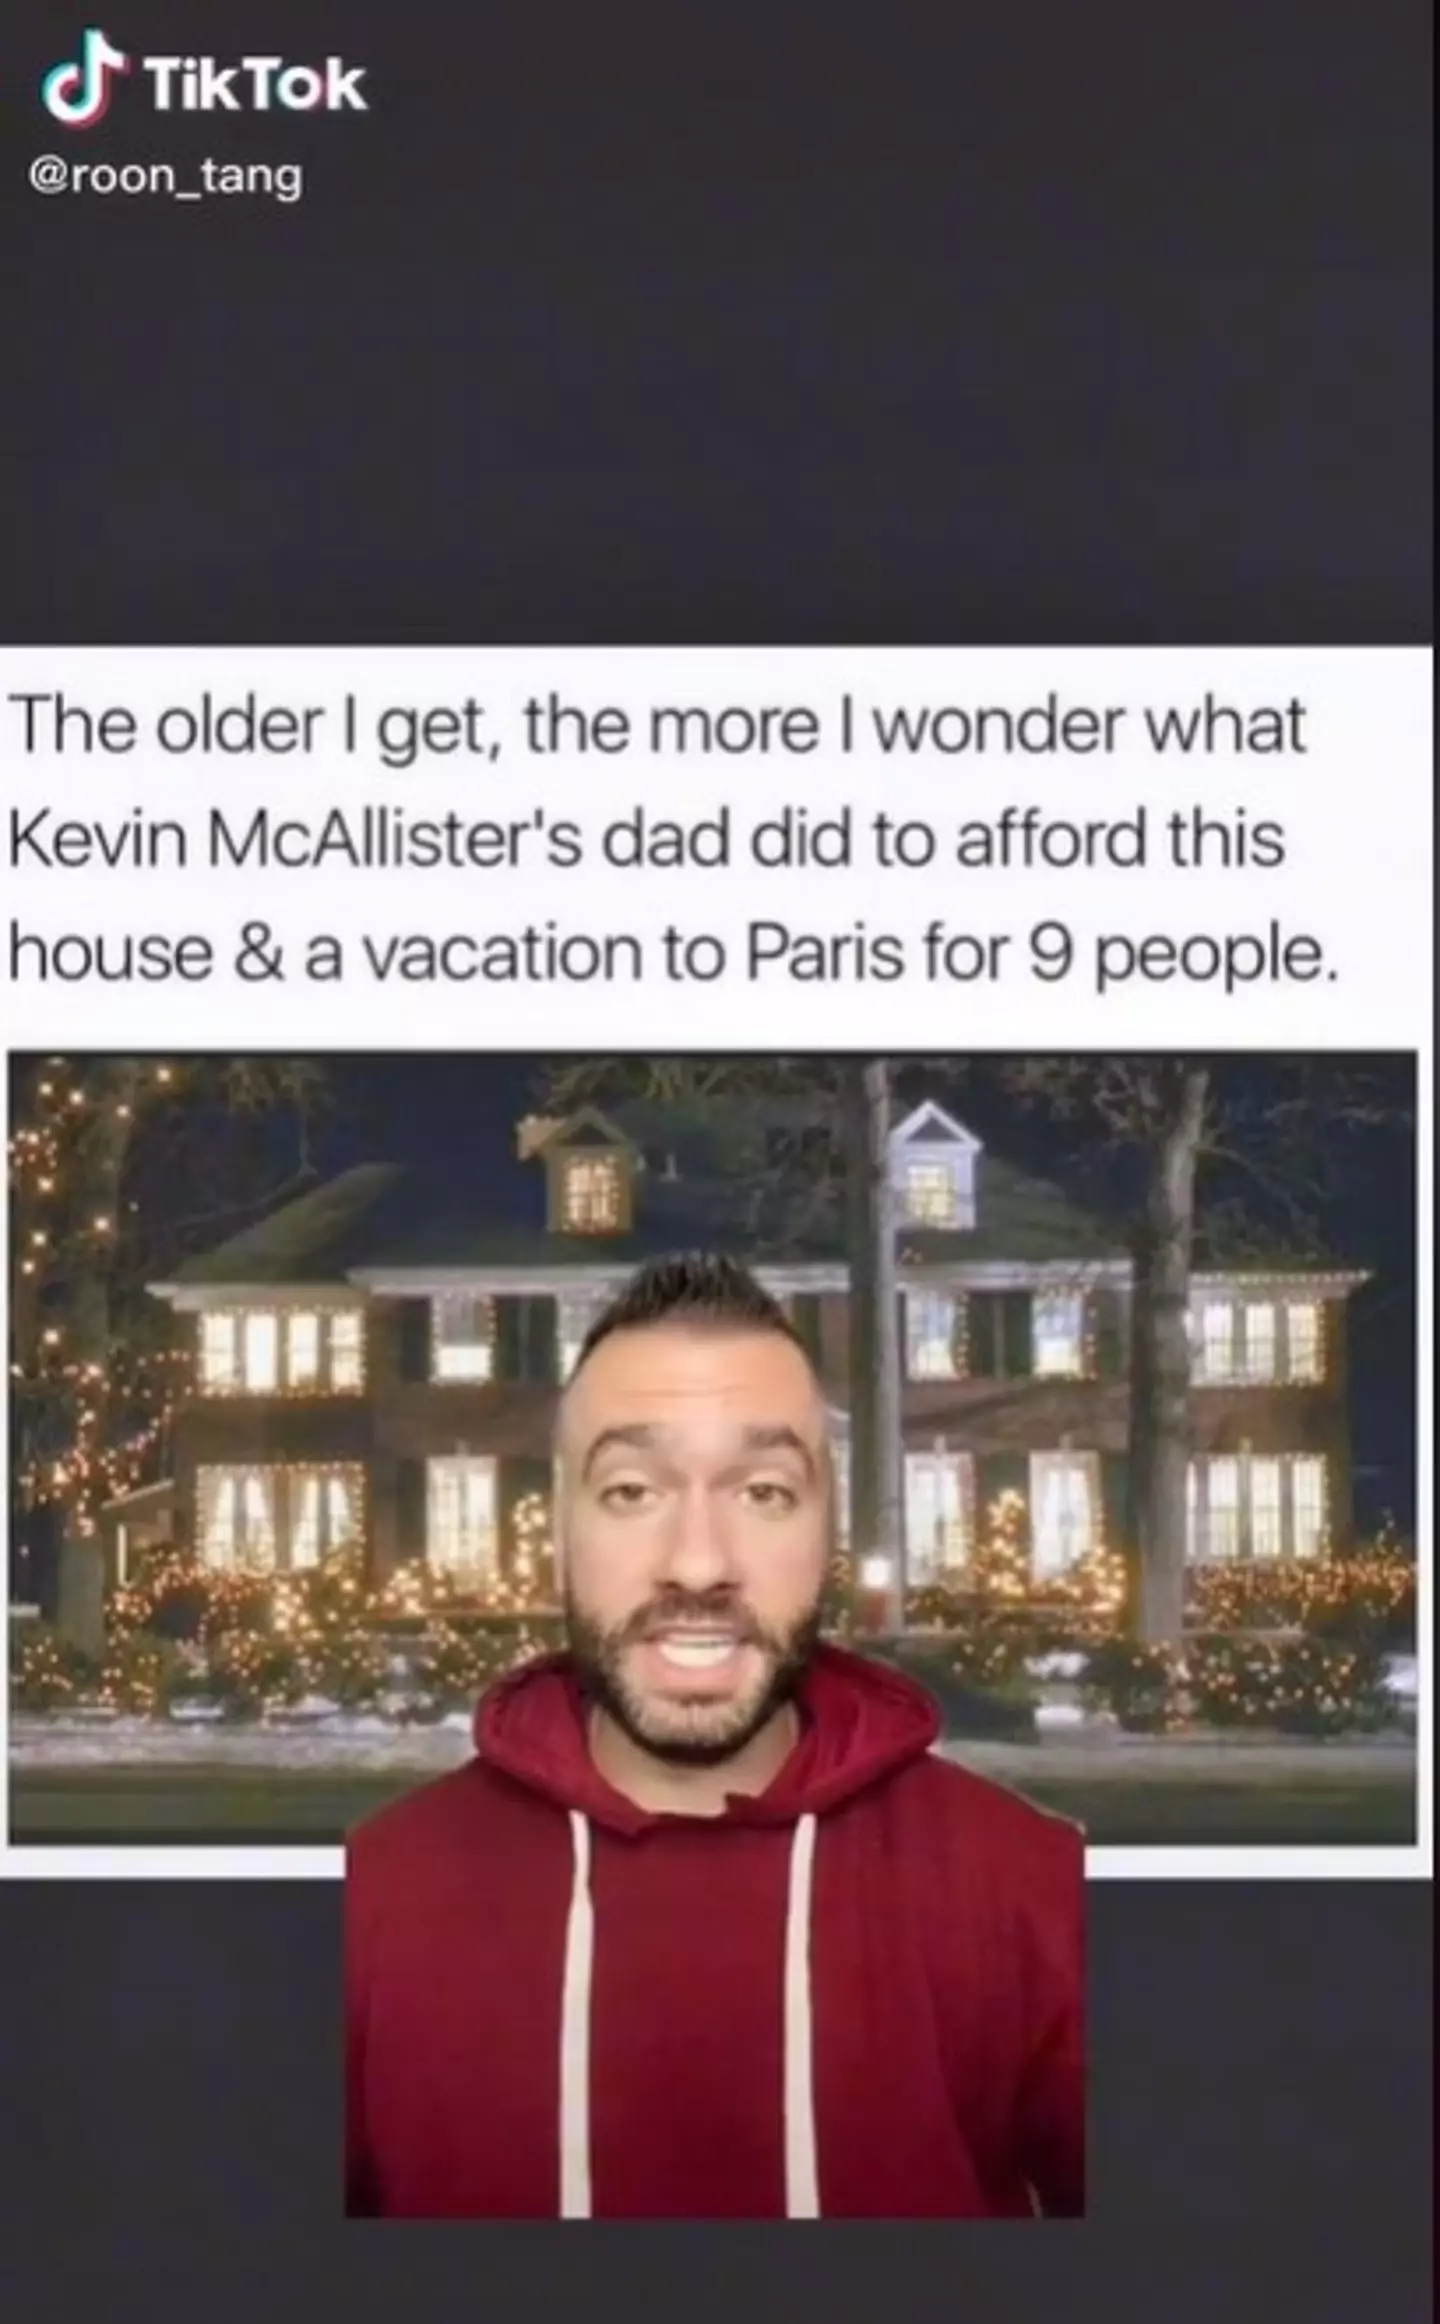 Brian Roon talks about the theory in his TikTok video.